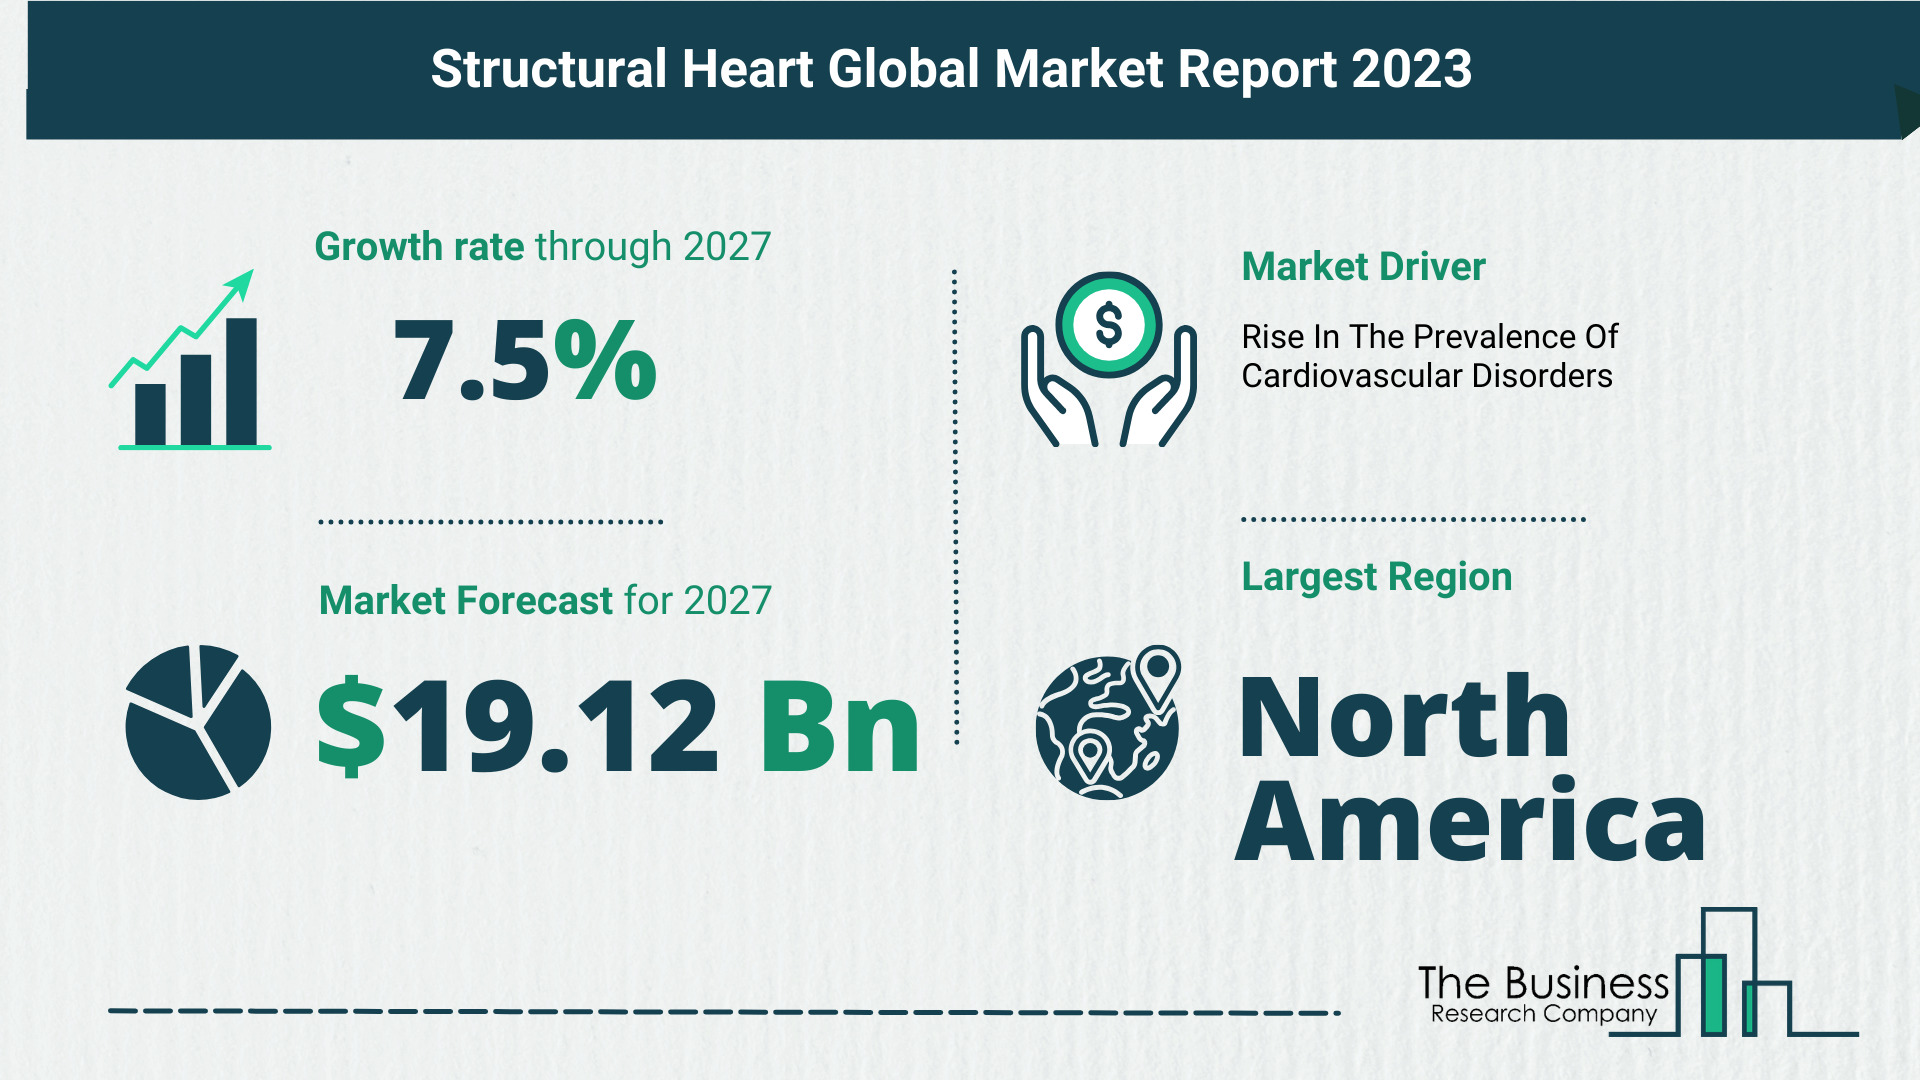 Key Trends And Drivers In The Structural Heart Market 2023